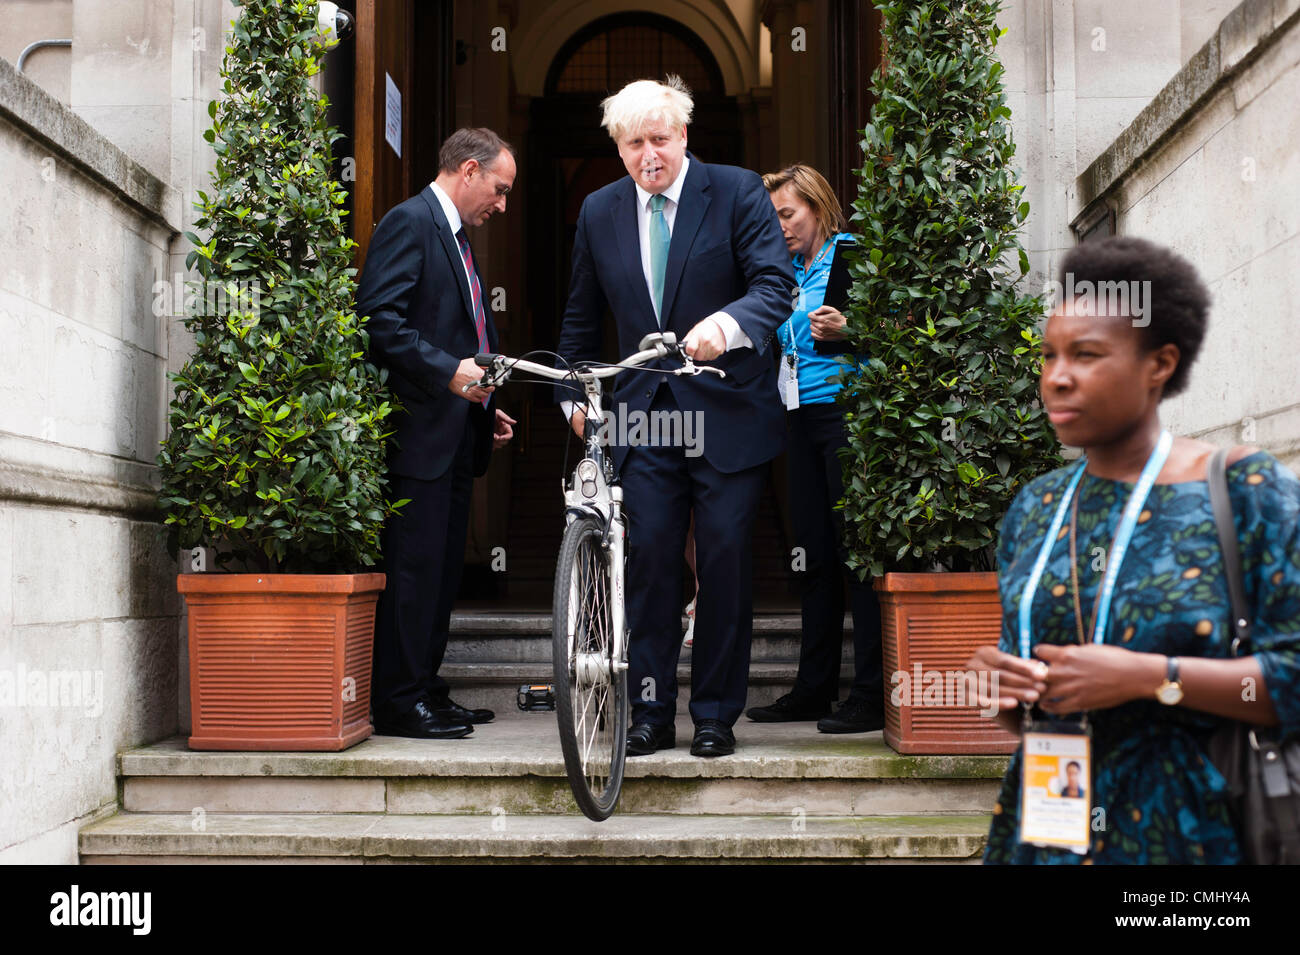 London, UK – 13 August 2012: Boris Johnson during the final press conference of the Olympic Games to discuss the success of London 2012. Credit:  pcruciatti / Alamy Live News Stock Photo